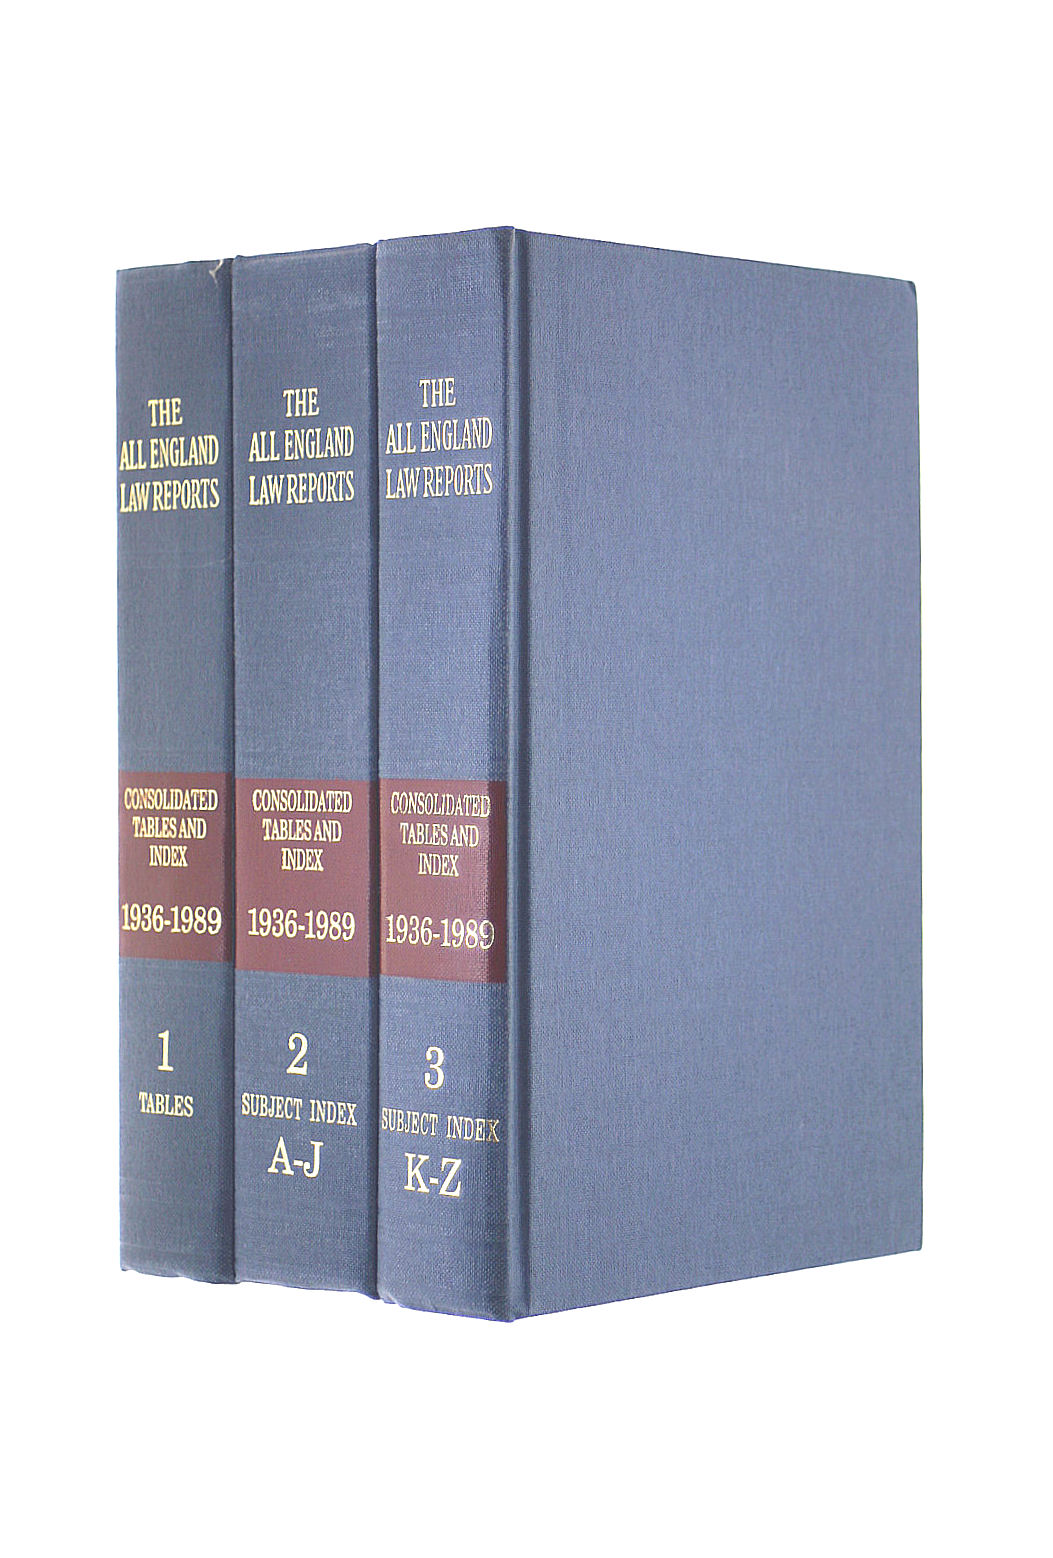 BUTTERWORTHS EDITORS - ALL ENGLAND LAW REPORTS CONSOLIDATED INDEX 1936-1989